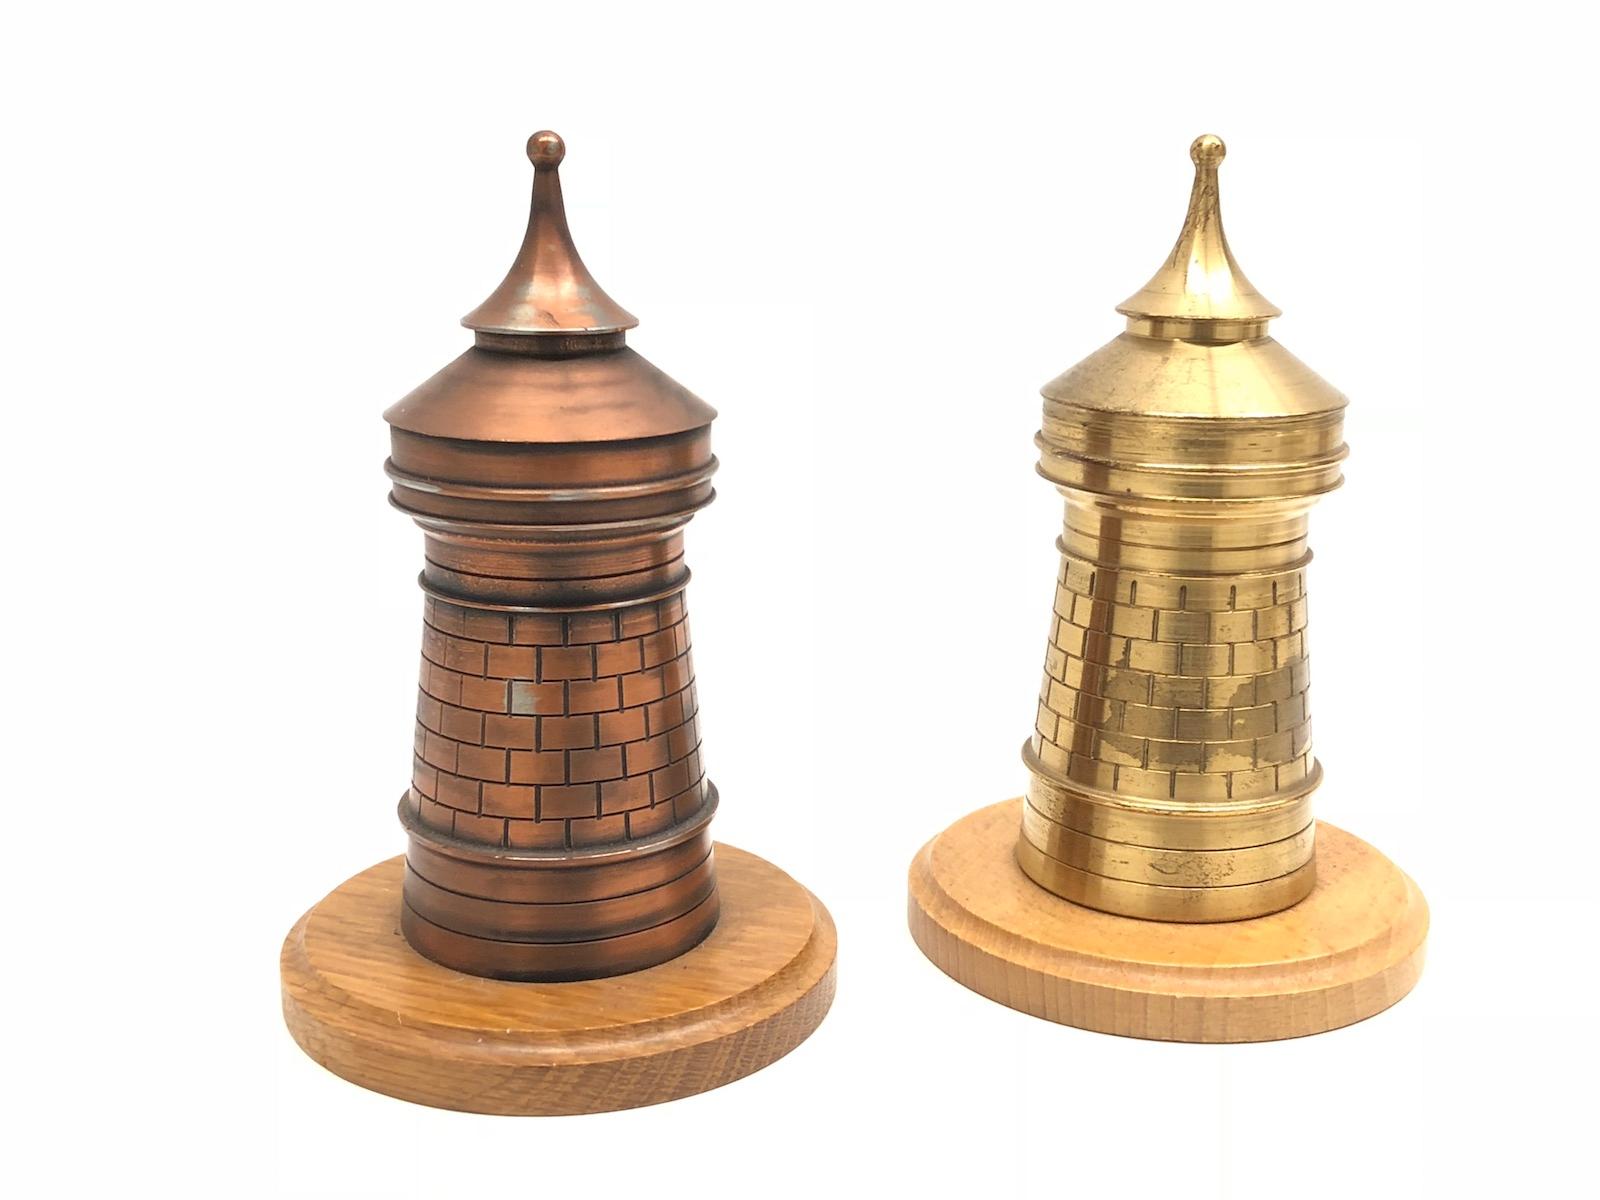 Two decorative Nuremberg City Tower souvenir building sculptures. Some wear with a nice patina, but this is old-age. Made of metal and a wooden base. These items were bought as a souvenir in Nuremberg, Germany and were made in the mid-20th century